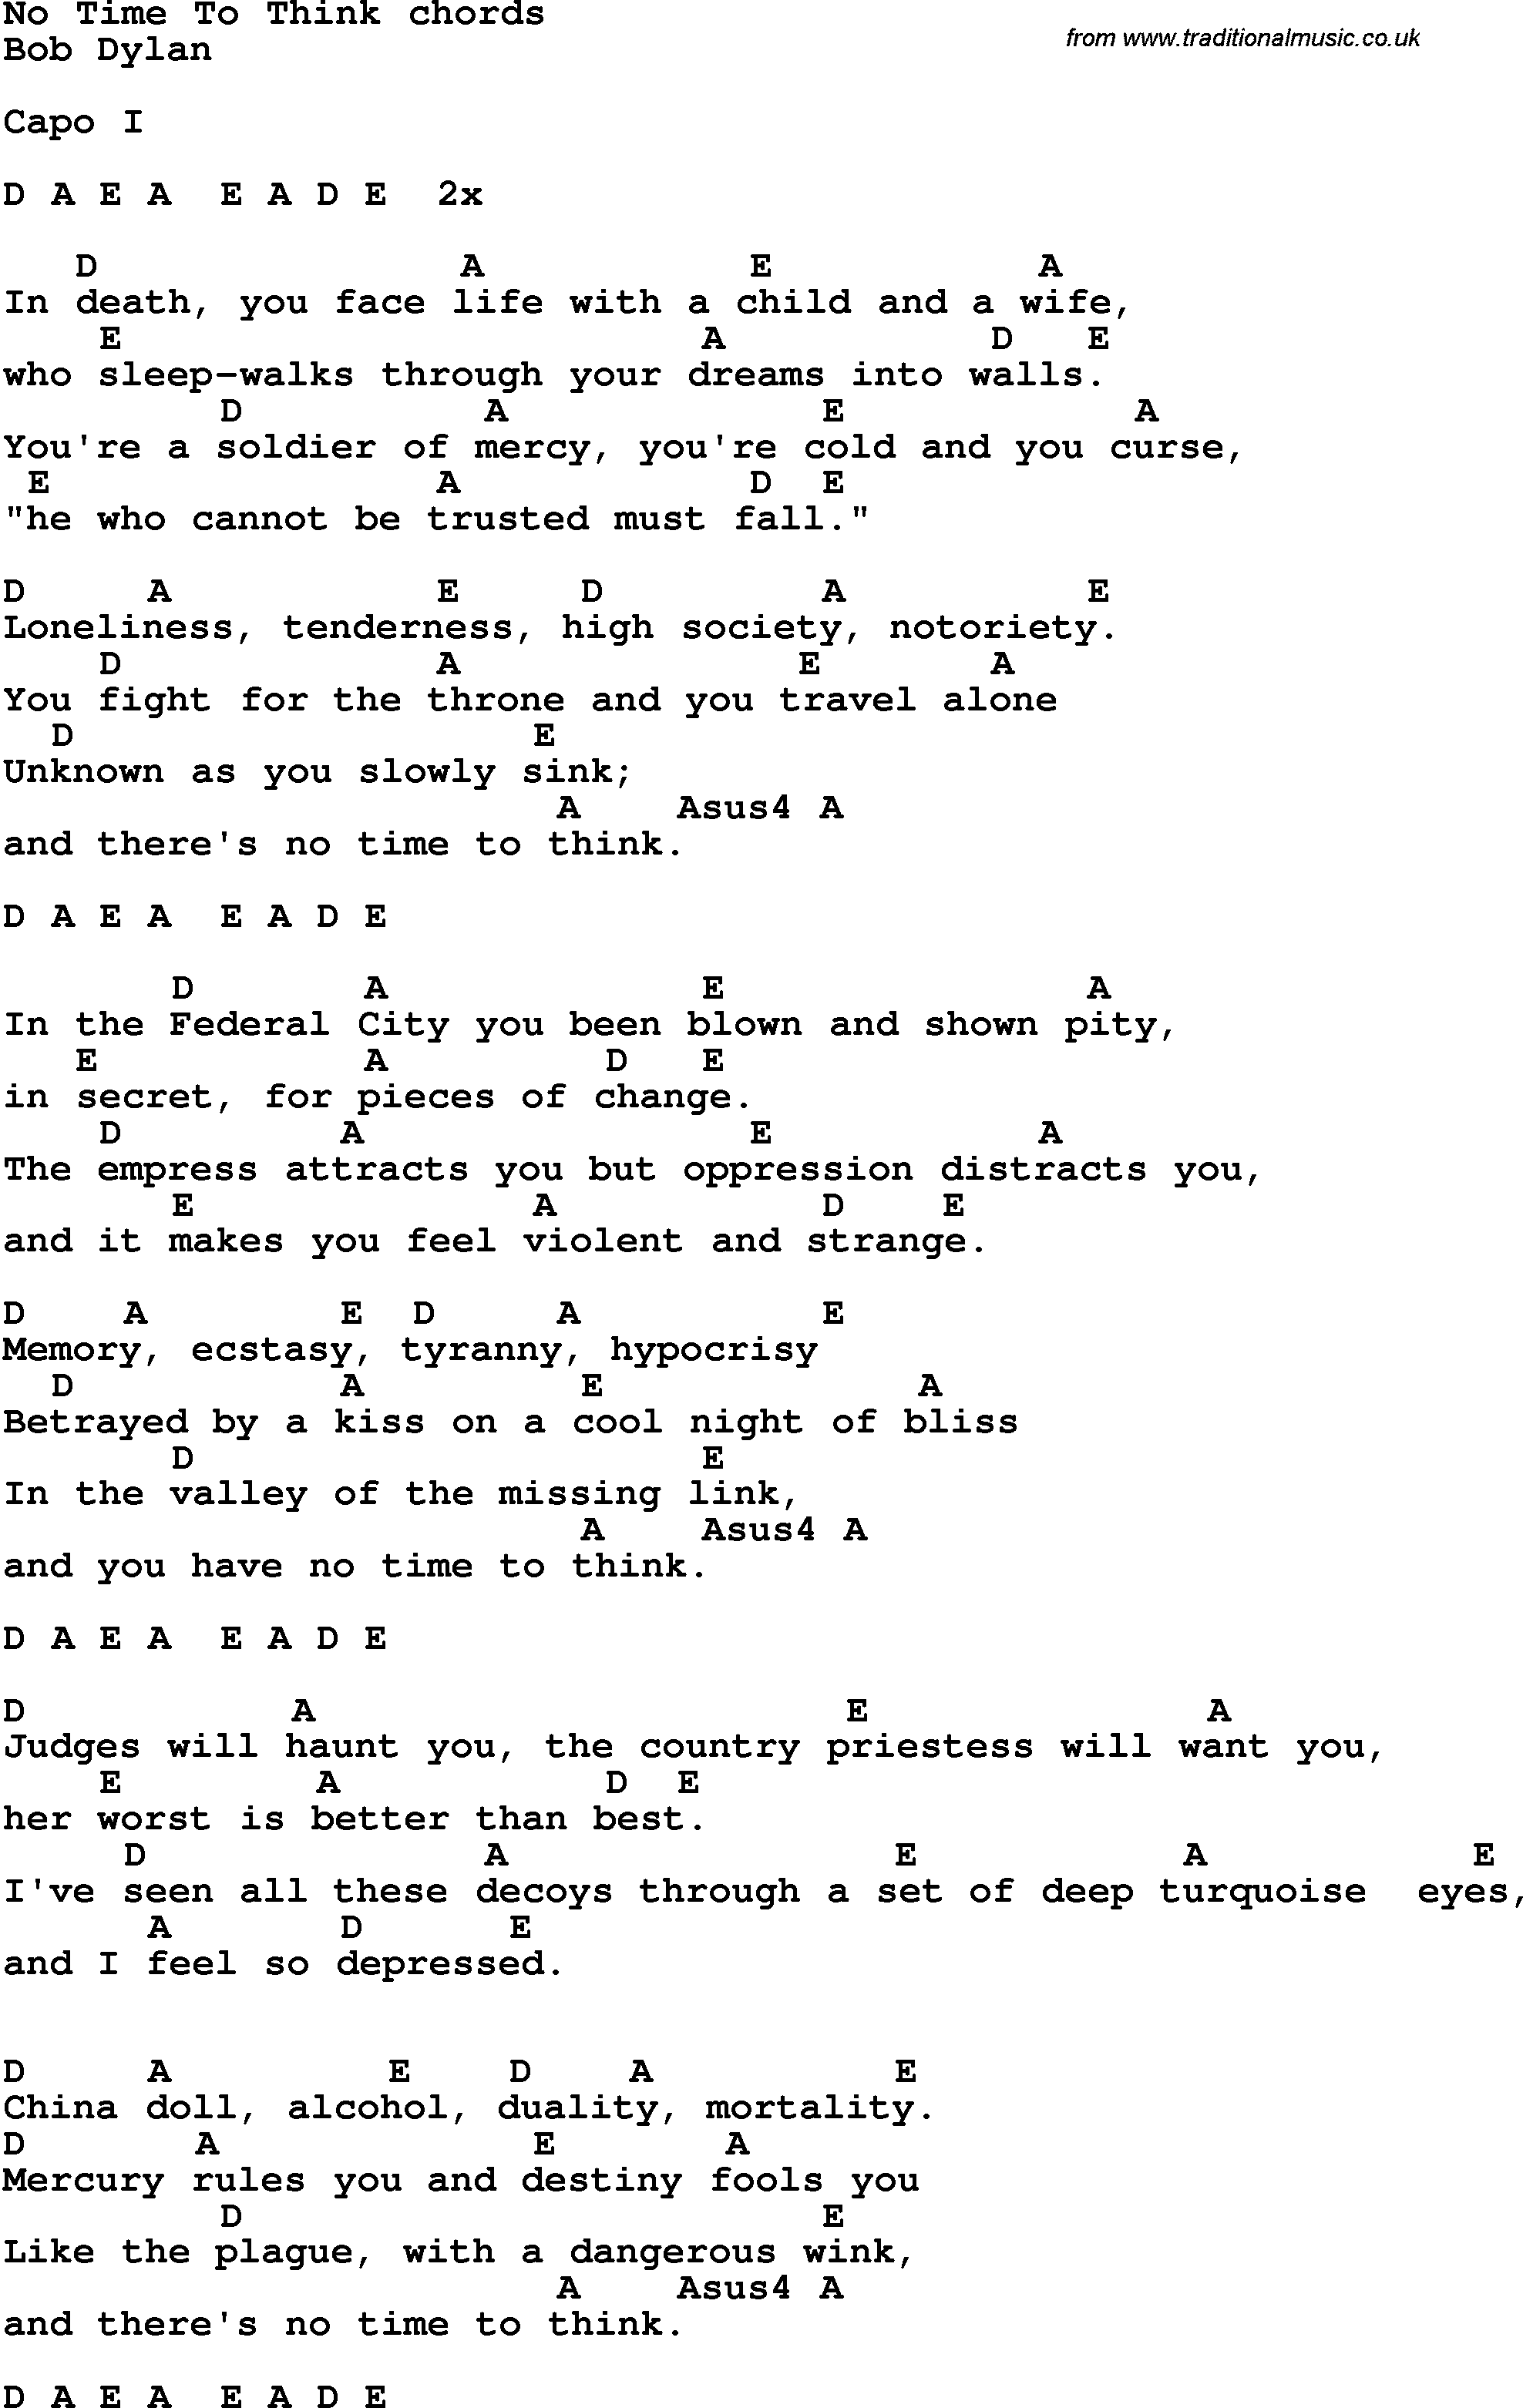 Song Lyrics with guitar chords for No Time To Think